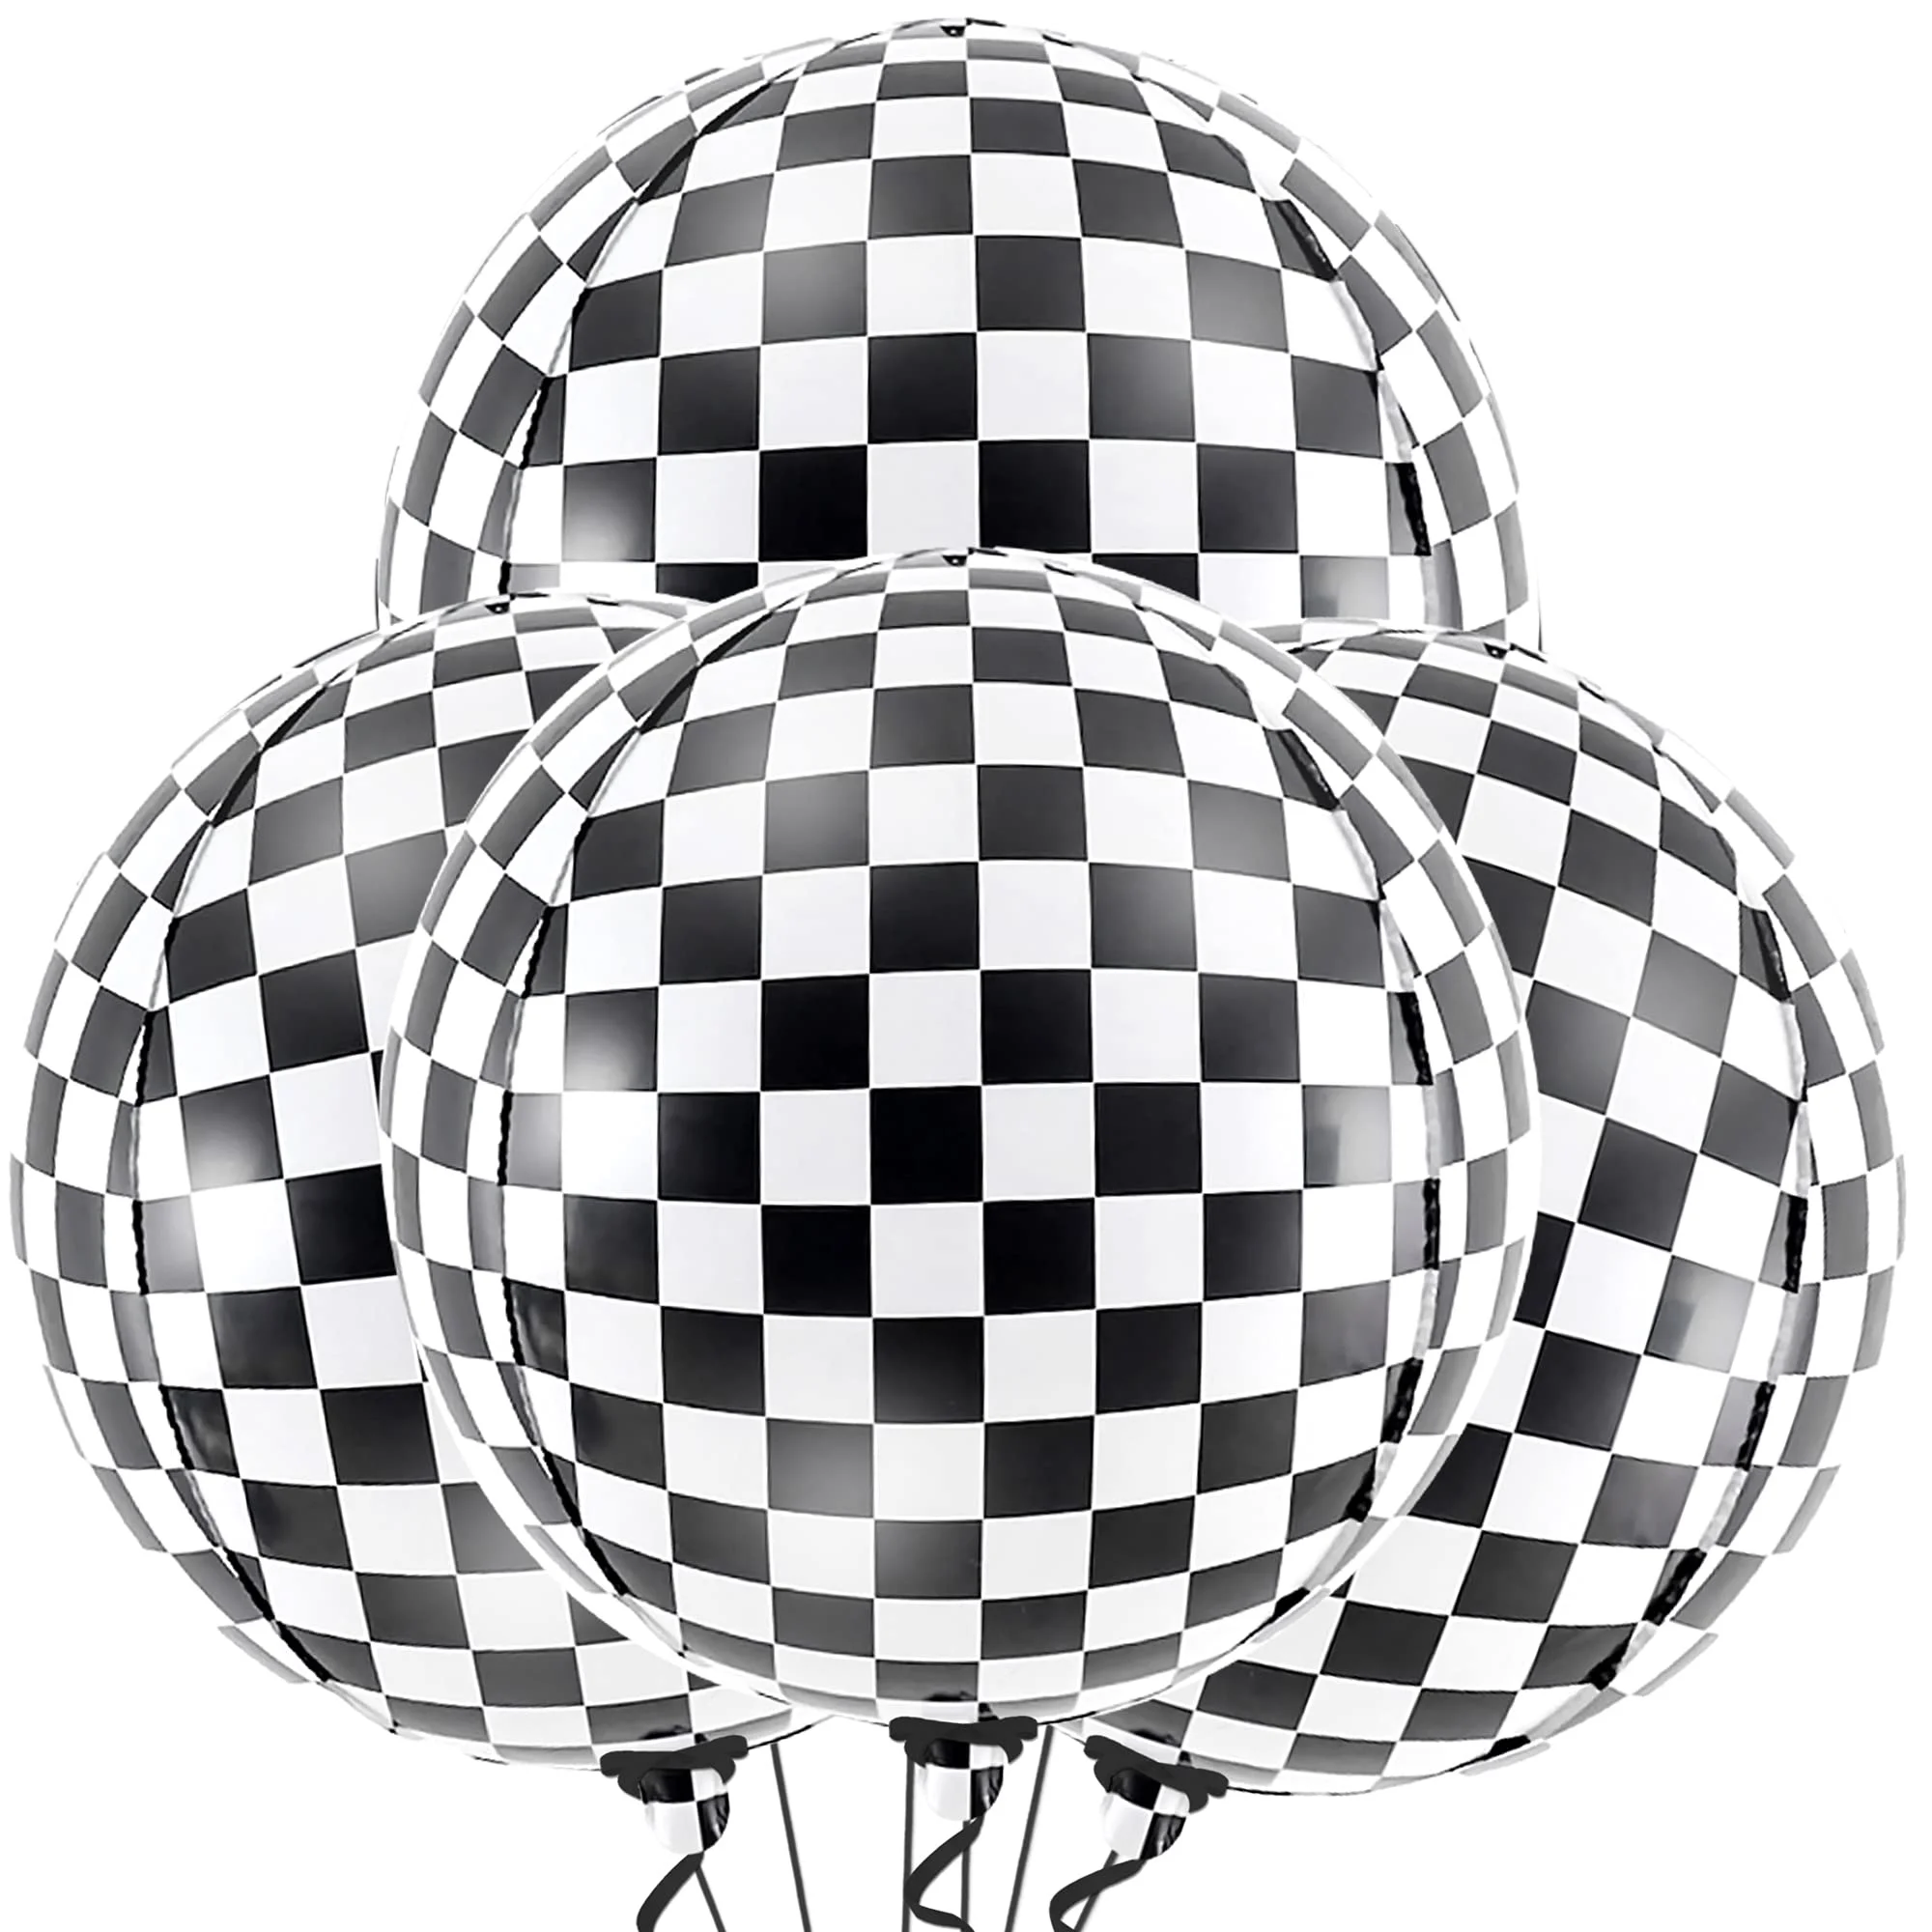 4pcs 22 Inch 4D Black and White Checkered Balloons Race Car Party Decoration Racing Theme Supplies 360 Degree Round Sphere Foil